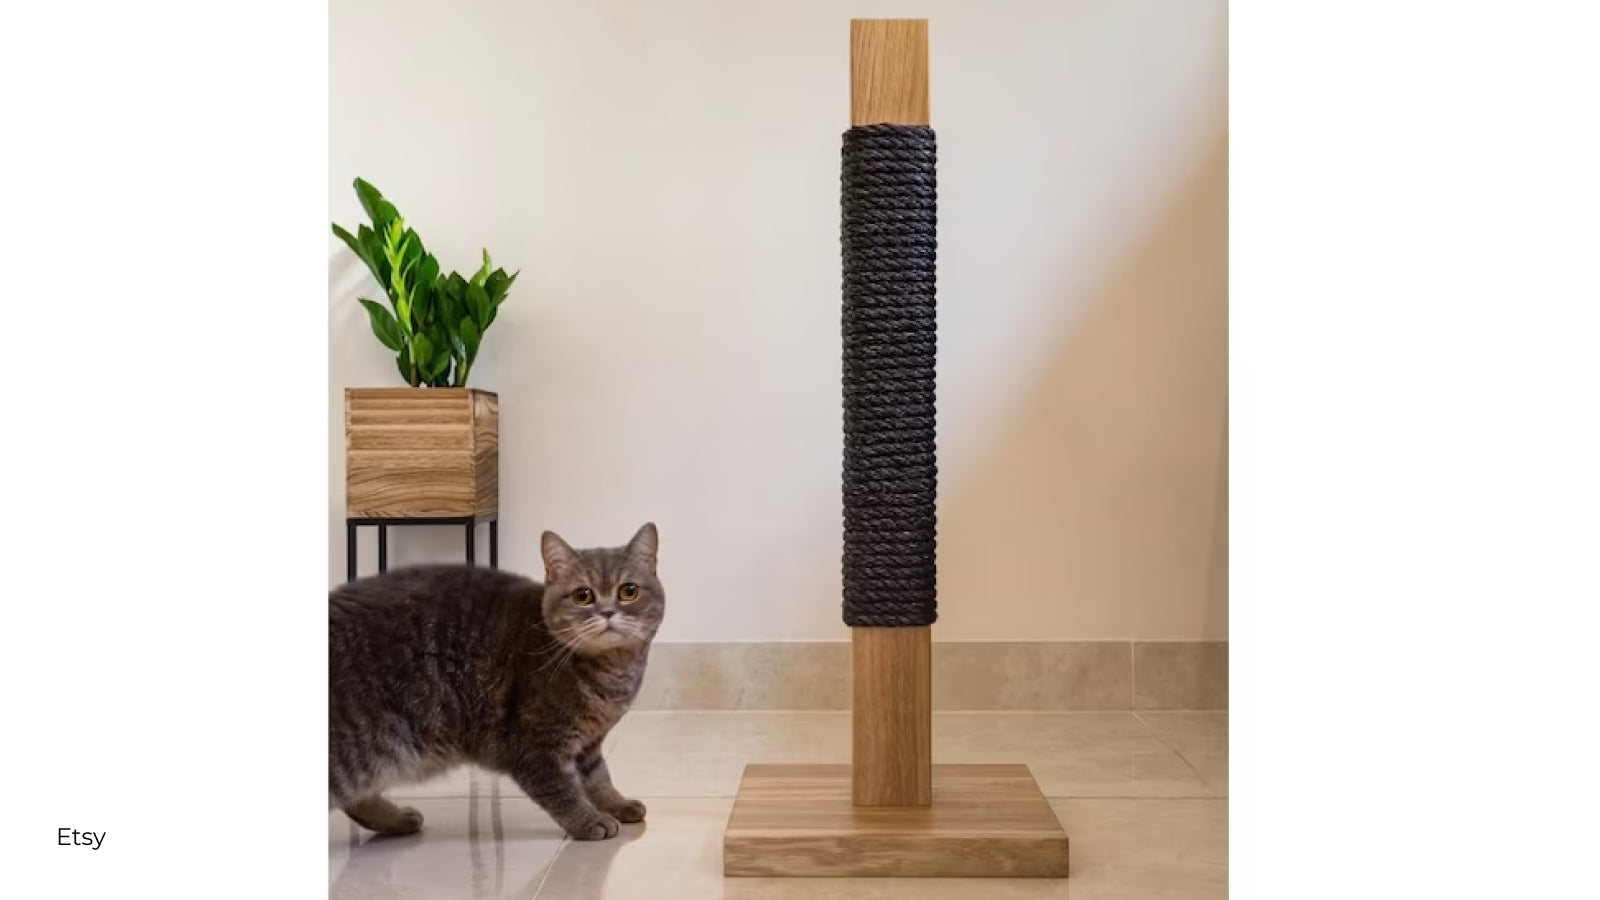 A gray cat stands next to a wooden scratch post on a floor stand